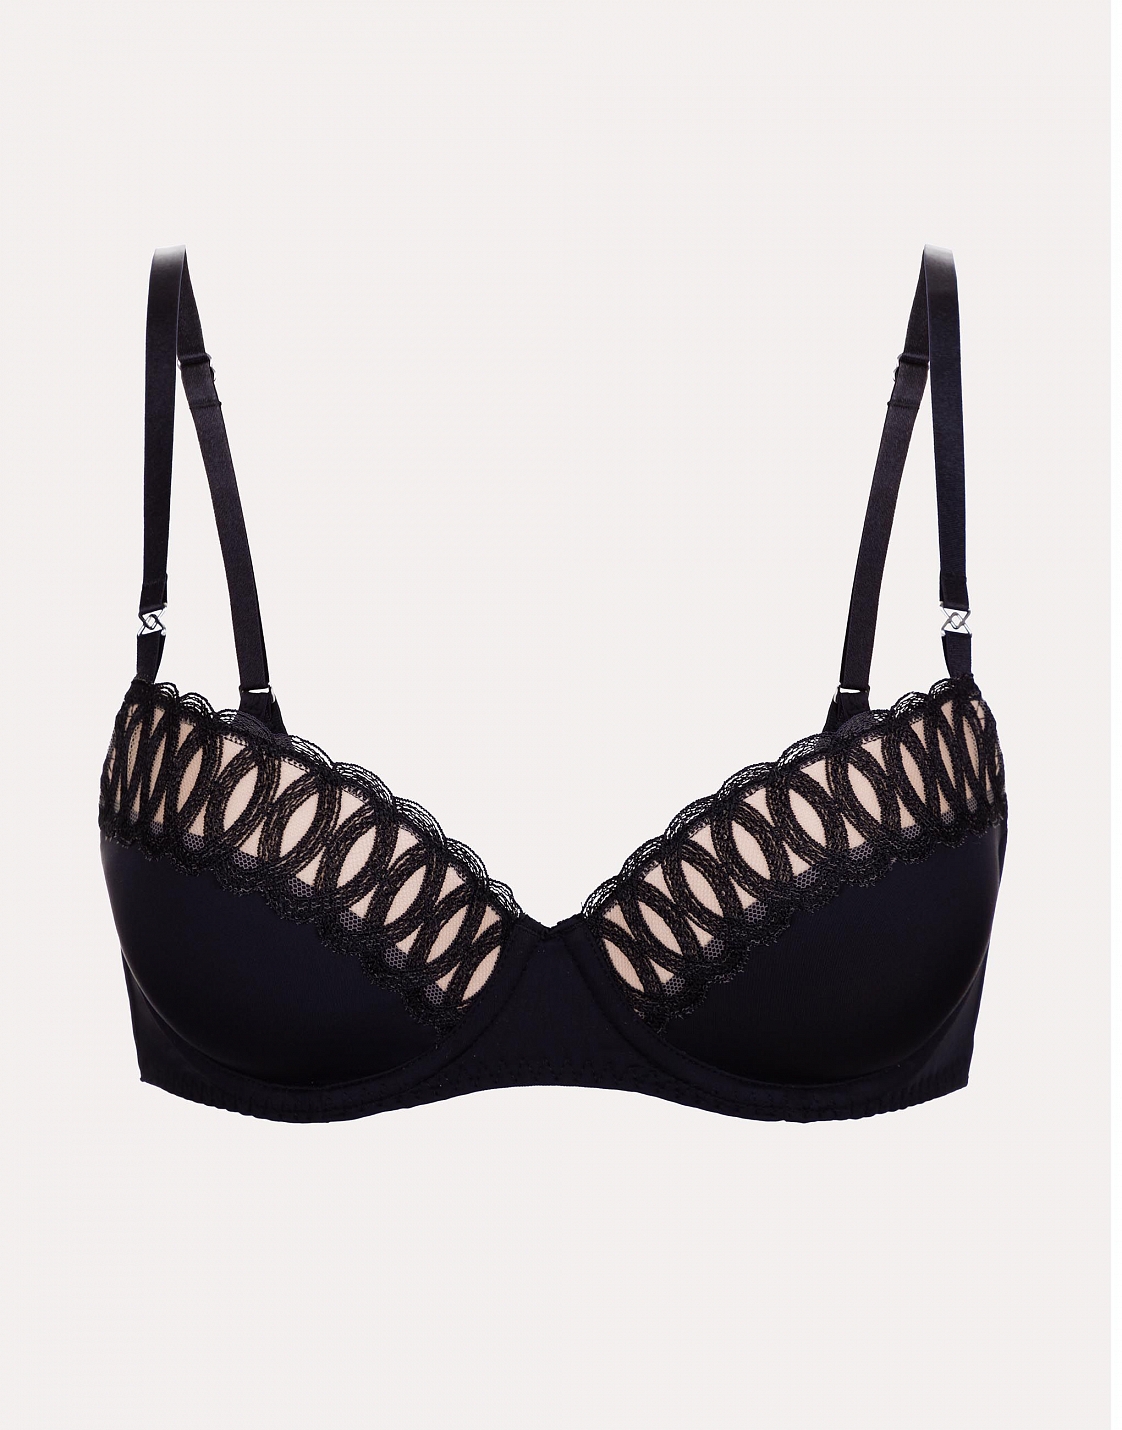 Push-up bra with molded cups on a chestband Dorry to buy at a price of  44.90 €